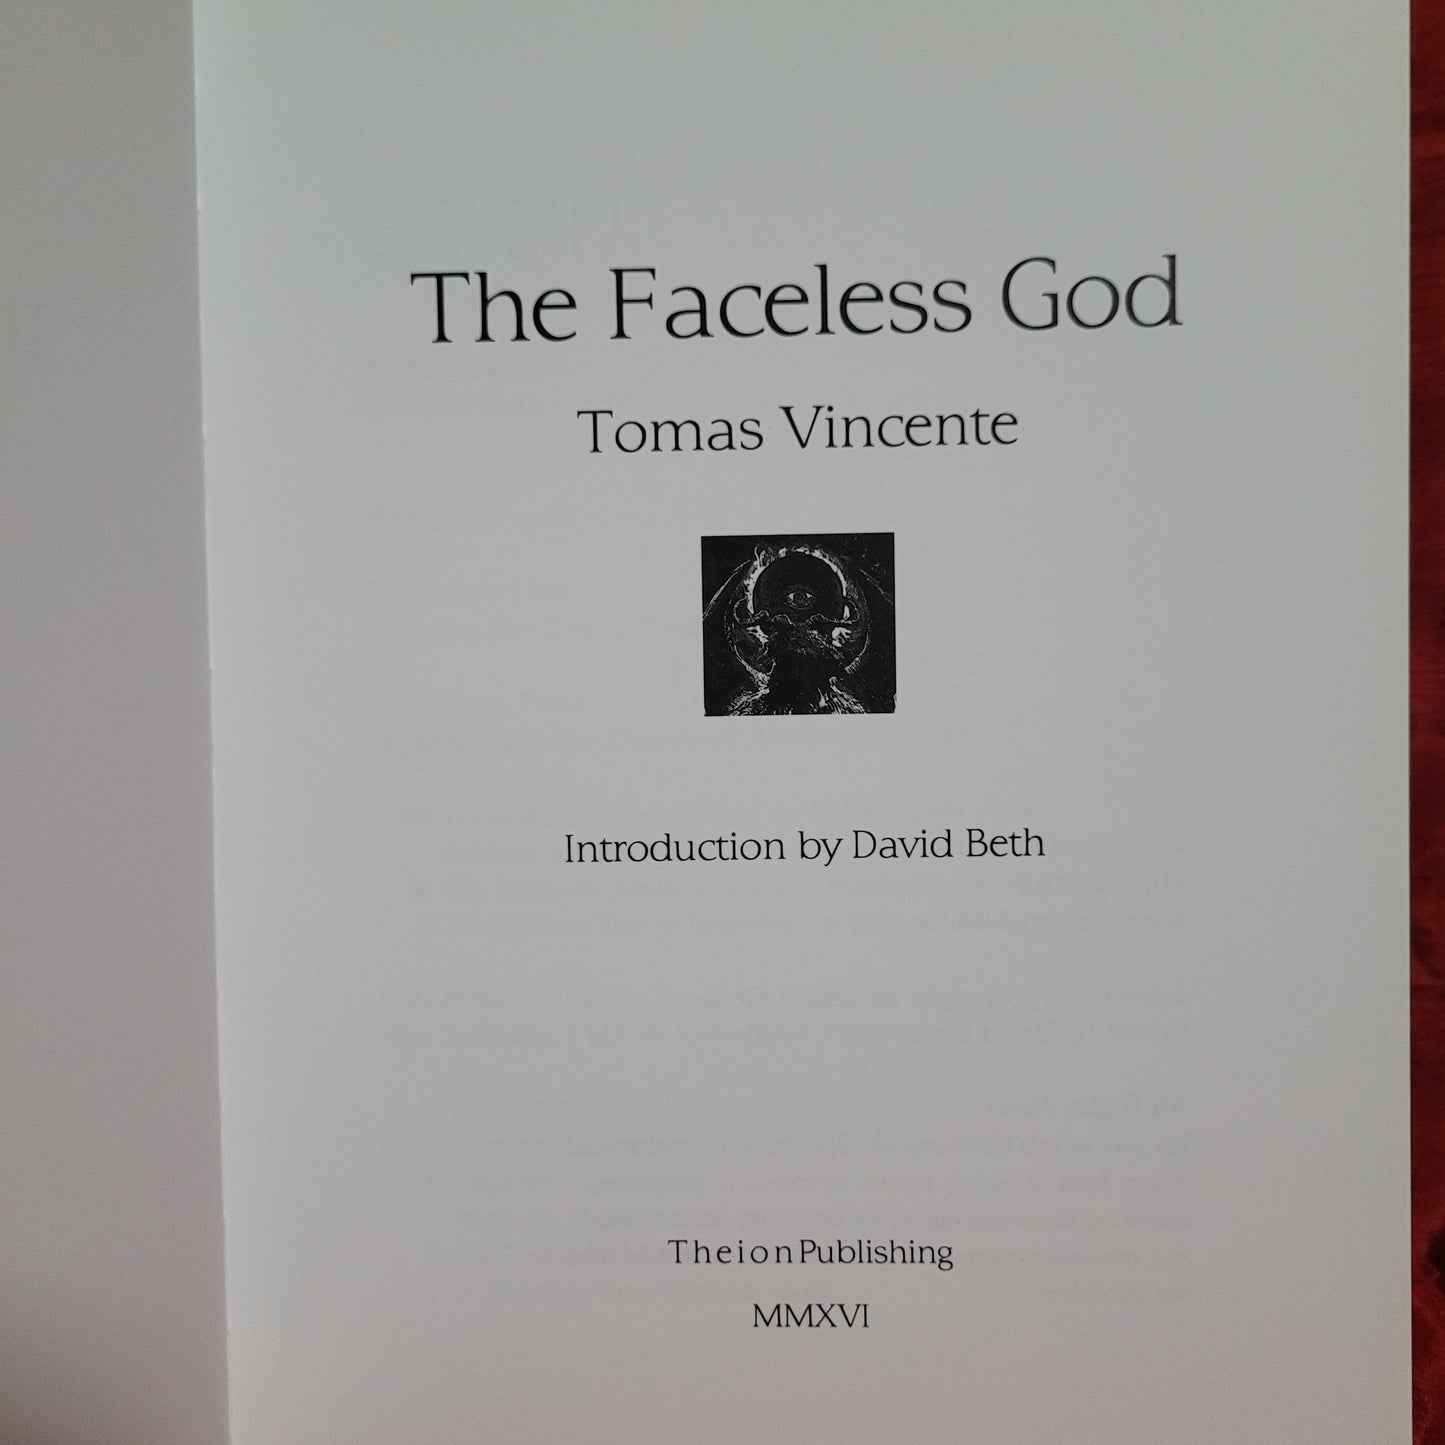 The Faceless God by Tomas Vincente (Theion Publishing, 2016) Cloth Hardcover